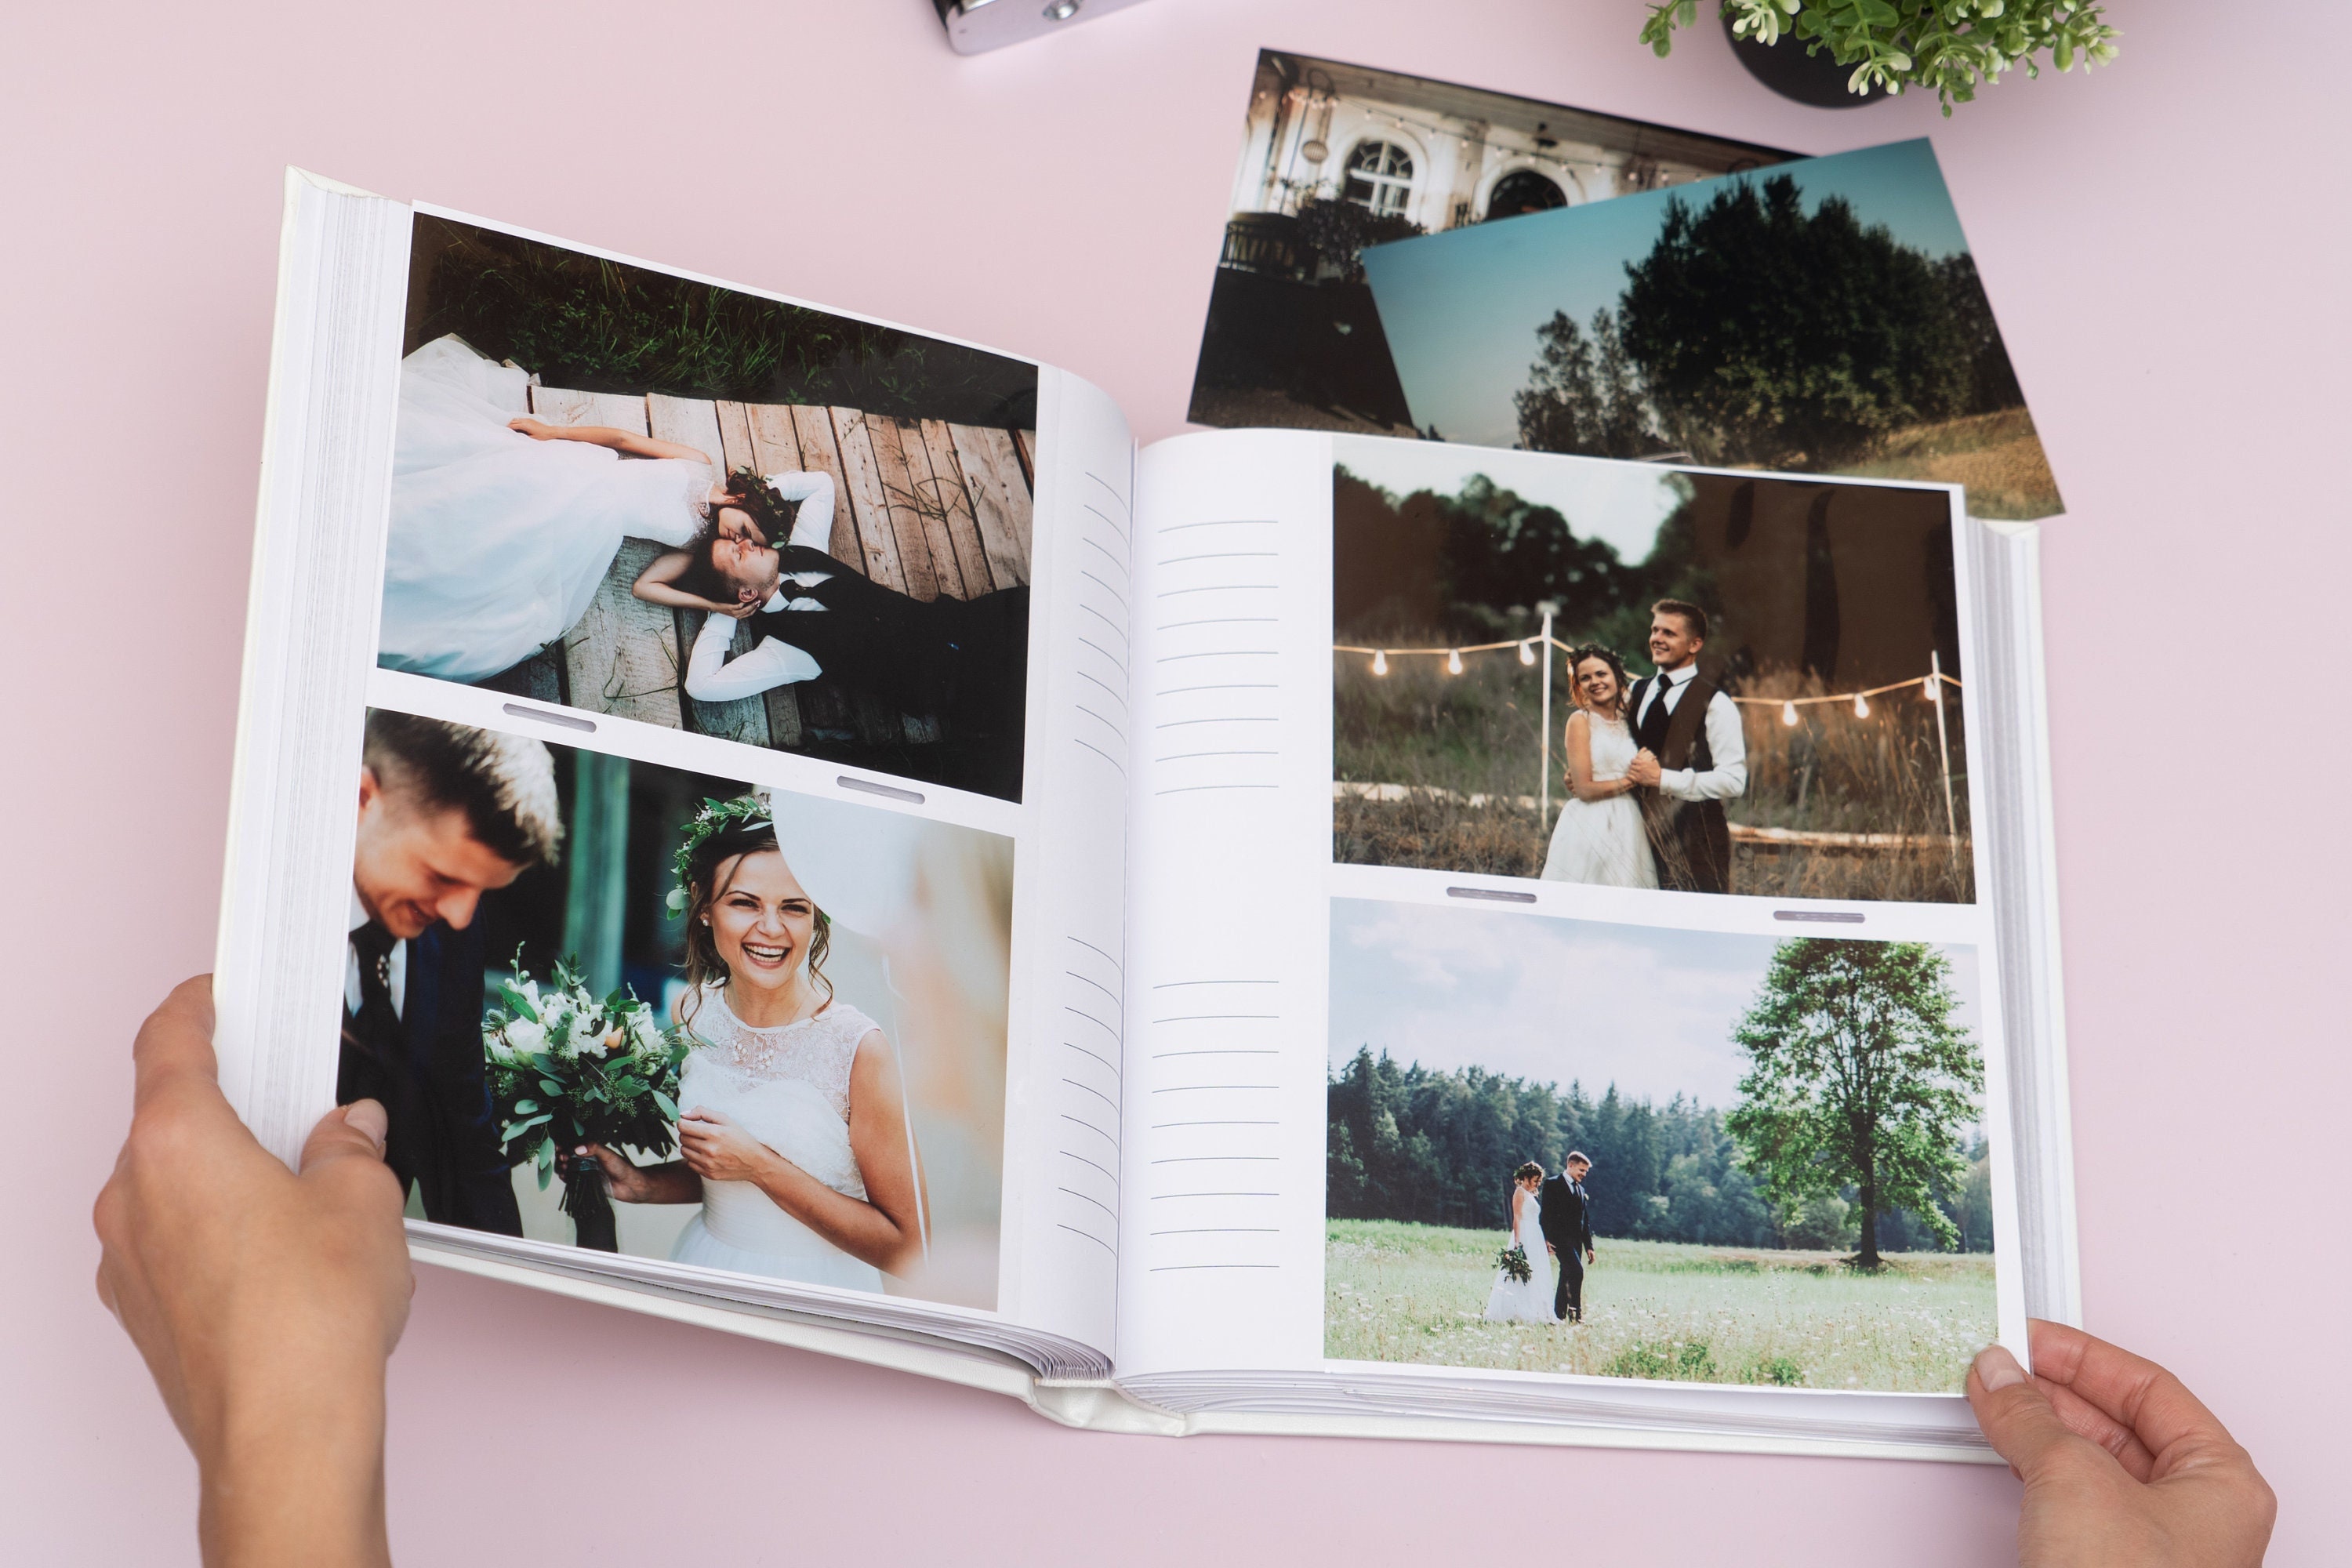 Classic Slip-in Photo Albums for 5x7 Prints - Personalise Cover Option -  The Photographer's Toolbox